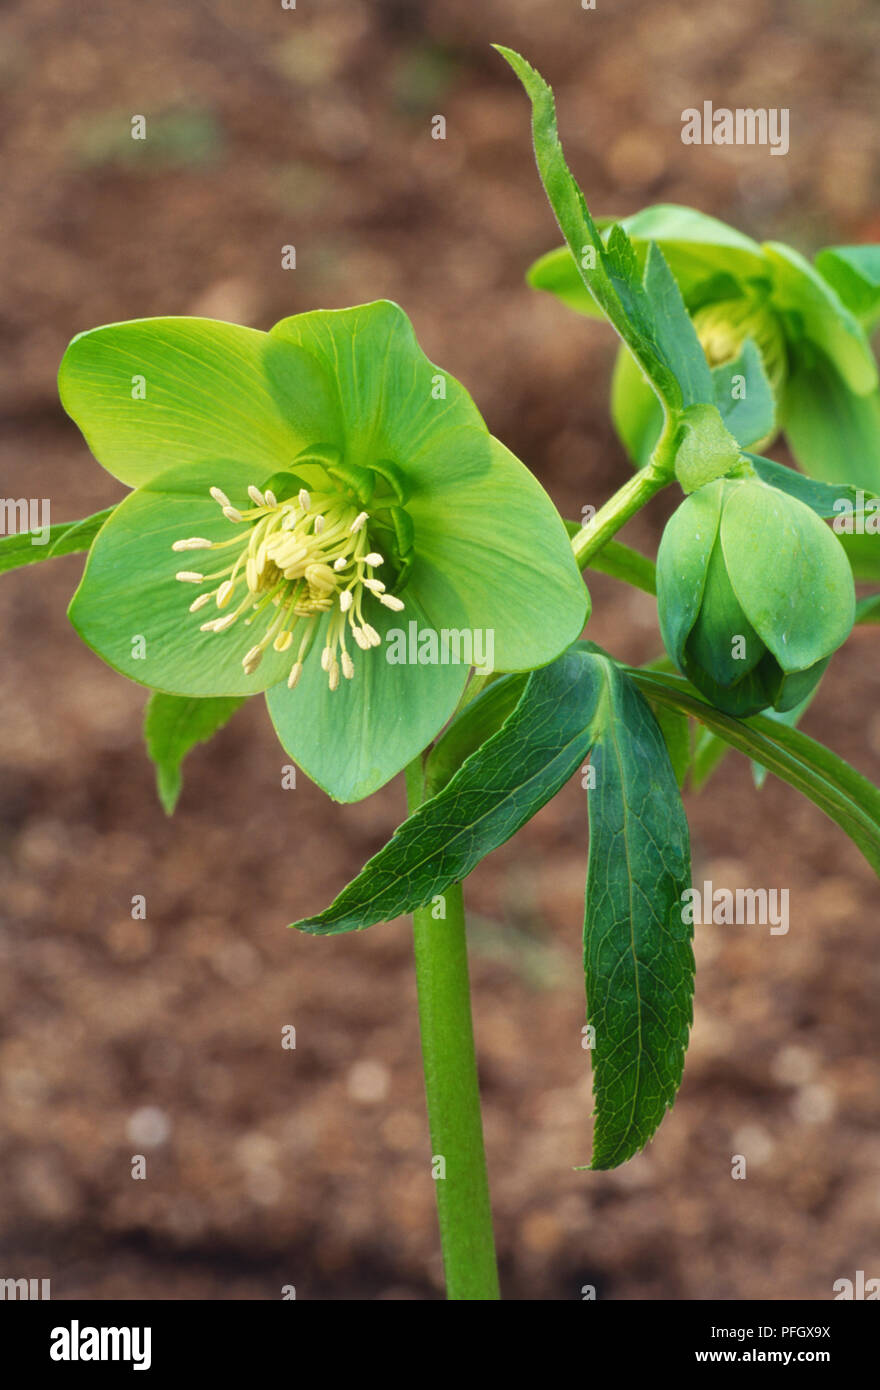 Helleborus cyclophyllus, yellow-green flower head with yellow stamen, and green leaves on stem Stock Photo